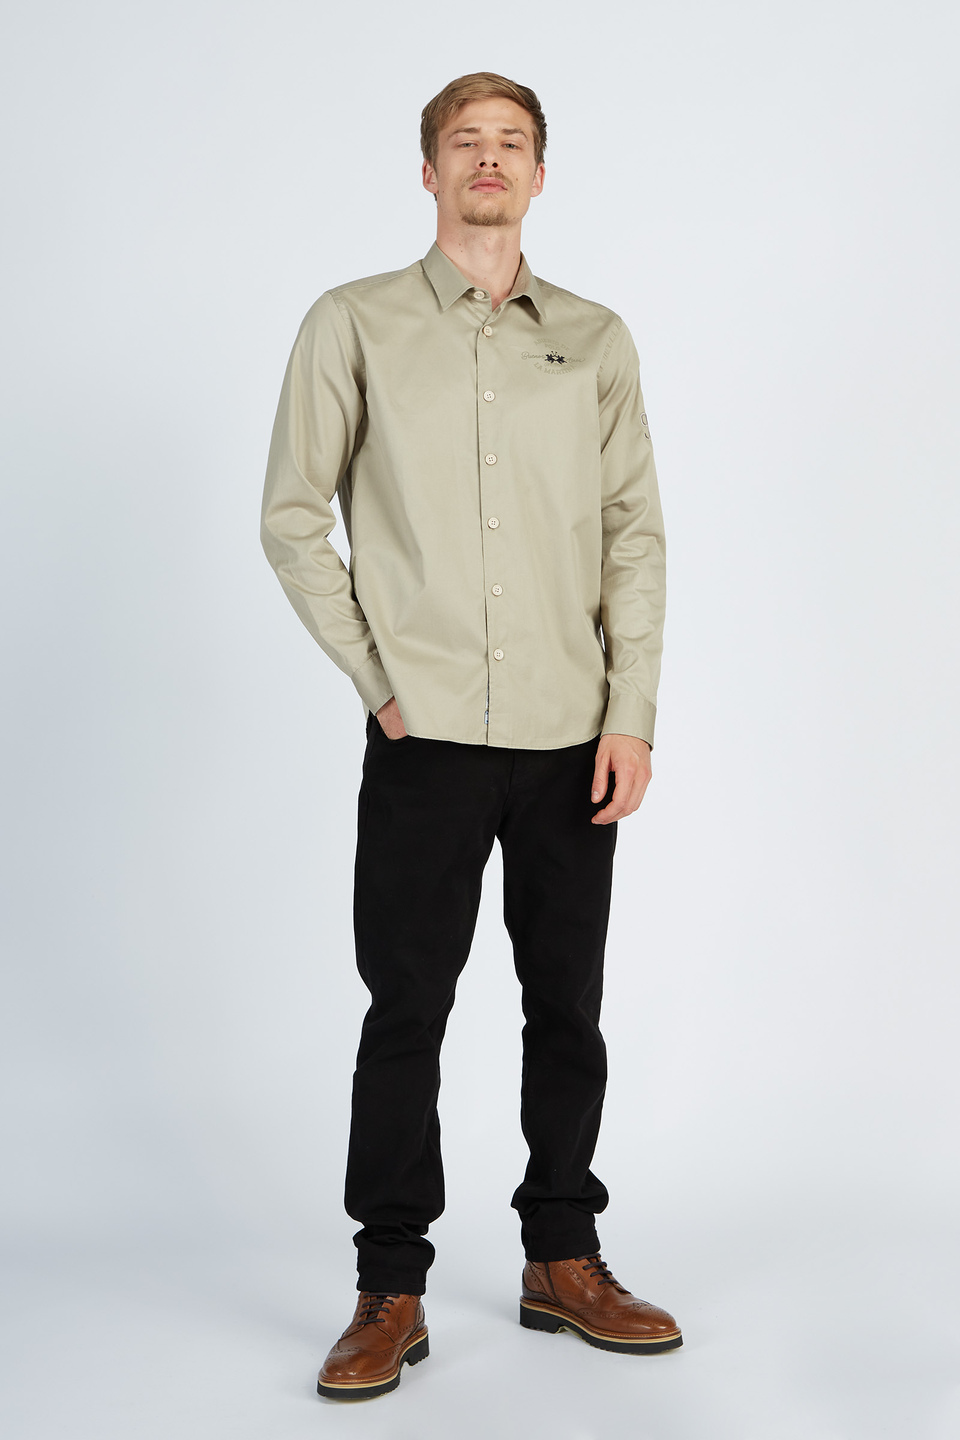 Leyendas Del Polo men’s shirt with long sleeves in regular fit twill cotton | La Martina - Official Online Shop